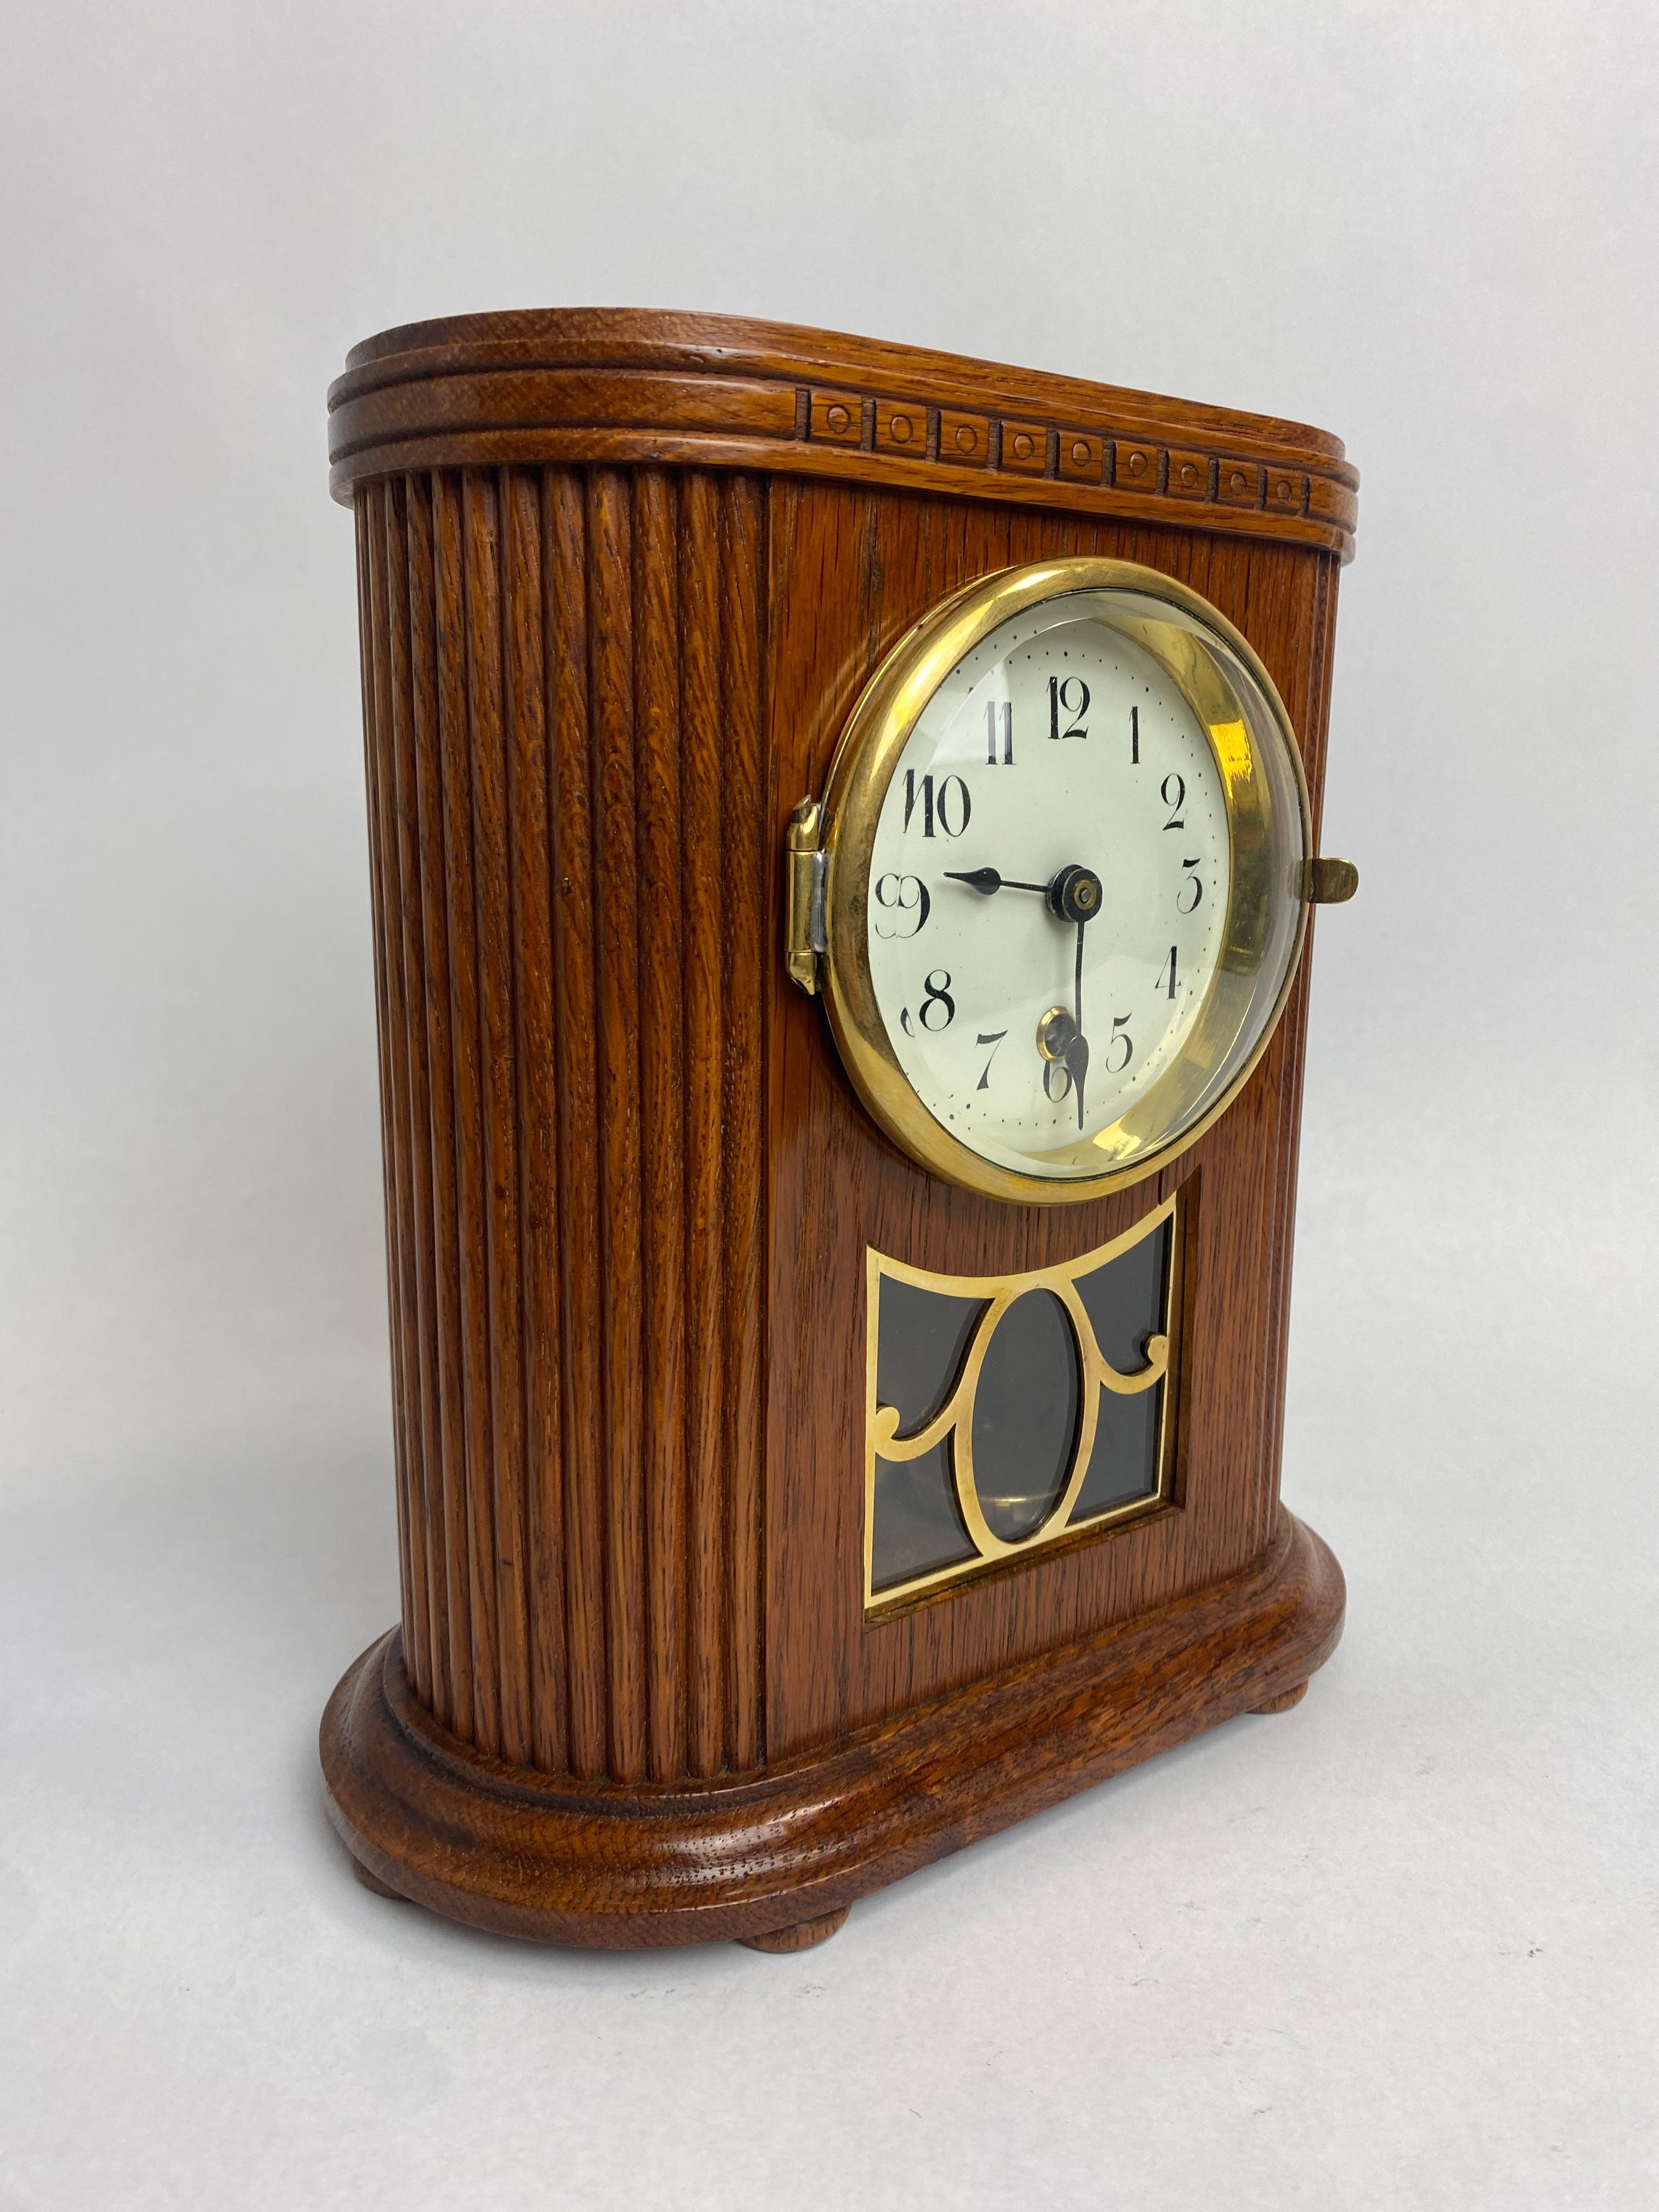 Secession mantel clock atr. to Otto Prutscher professionally stained and repolished.
